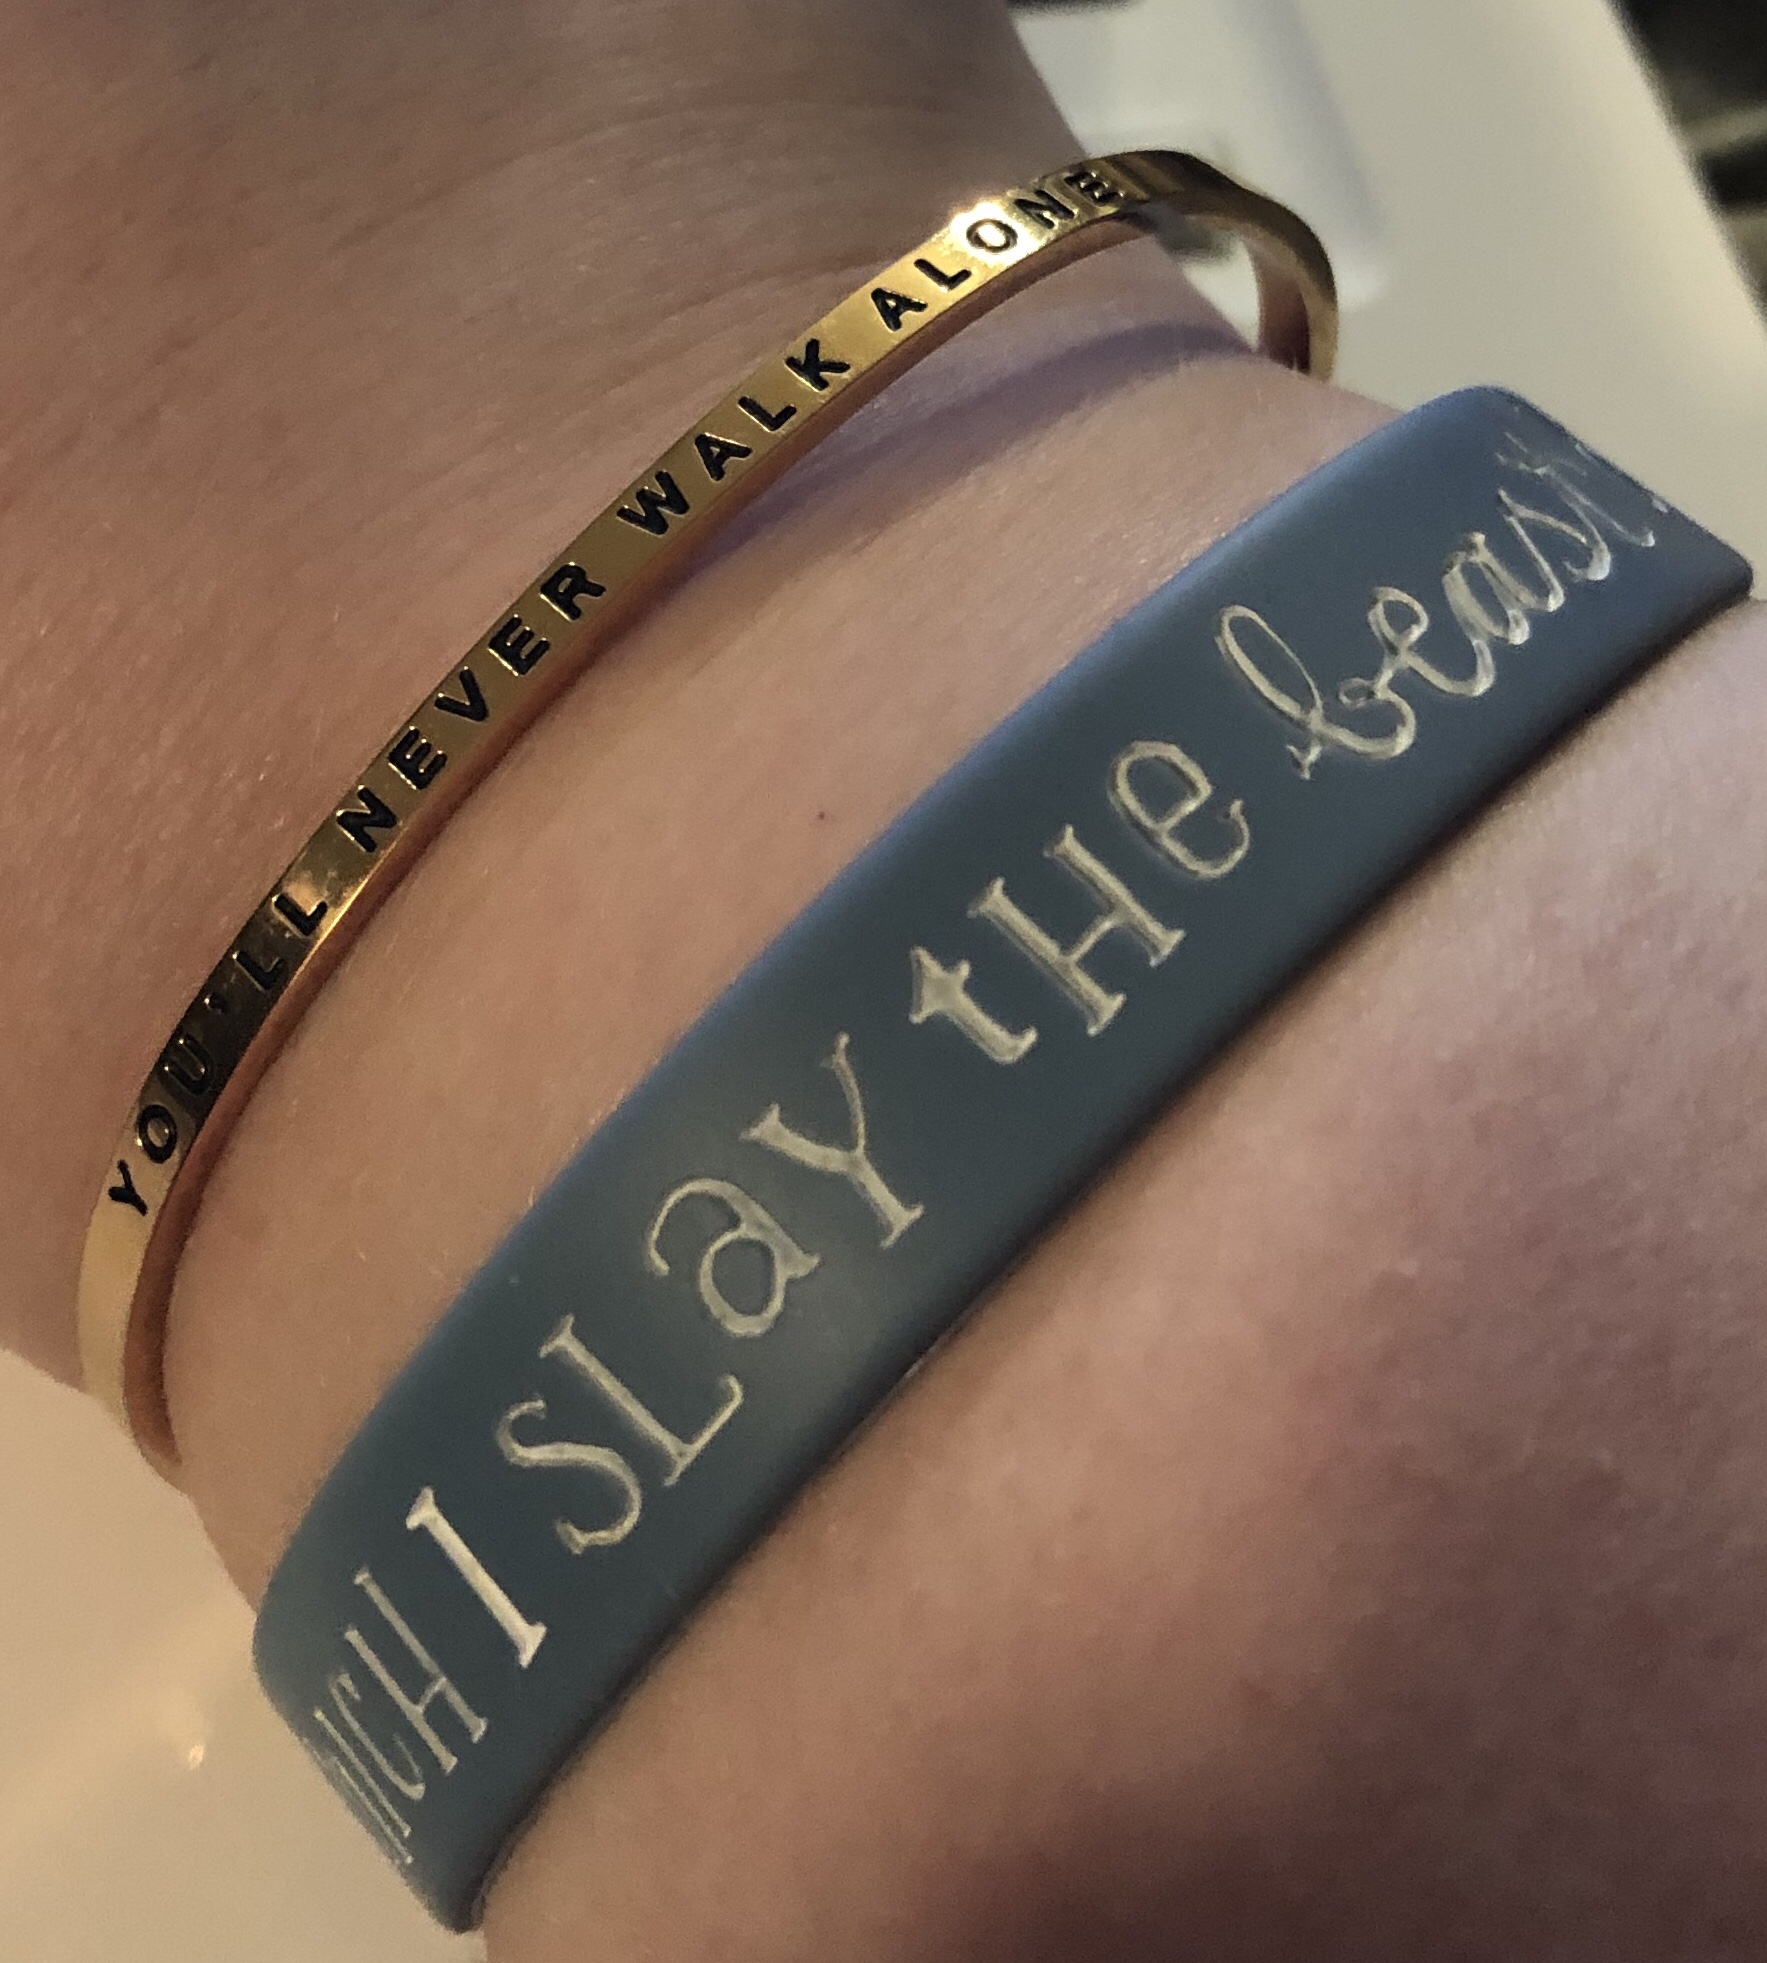 Photo of two bracelets on a wrist. The first says "You never walk alone" and the second shows the text "I slay the beast".